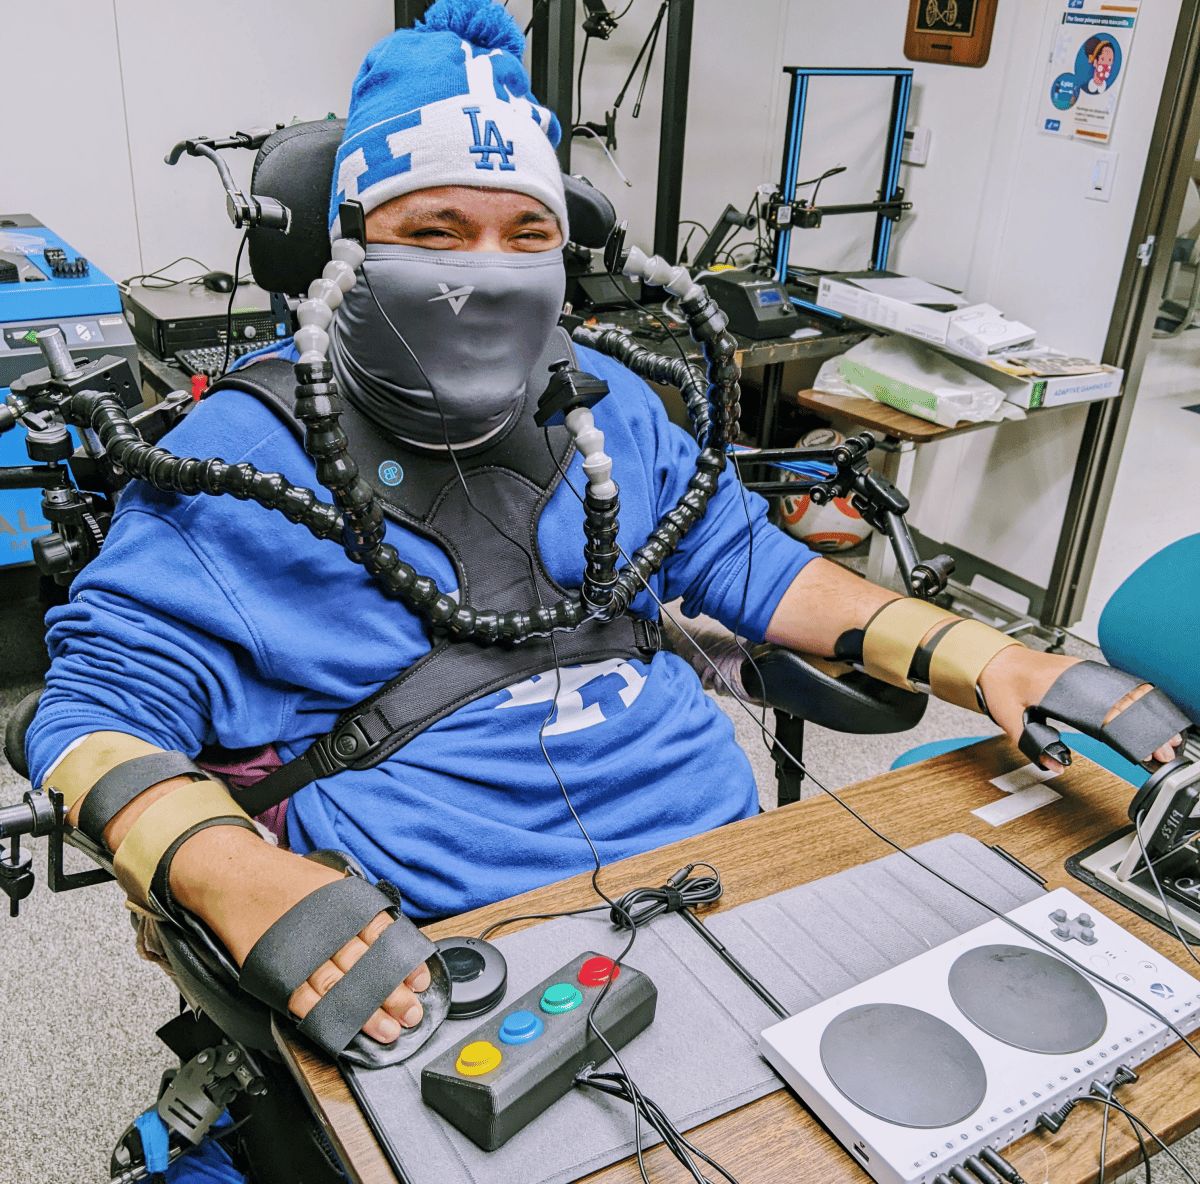 an image of Mr. R, who is using a custom adapted gaming setup using both 3D printed and commercially available components.